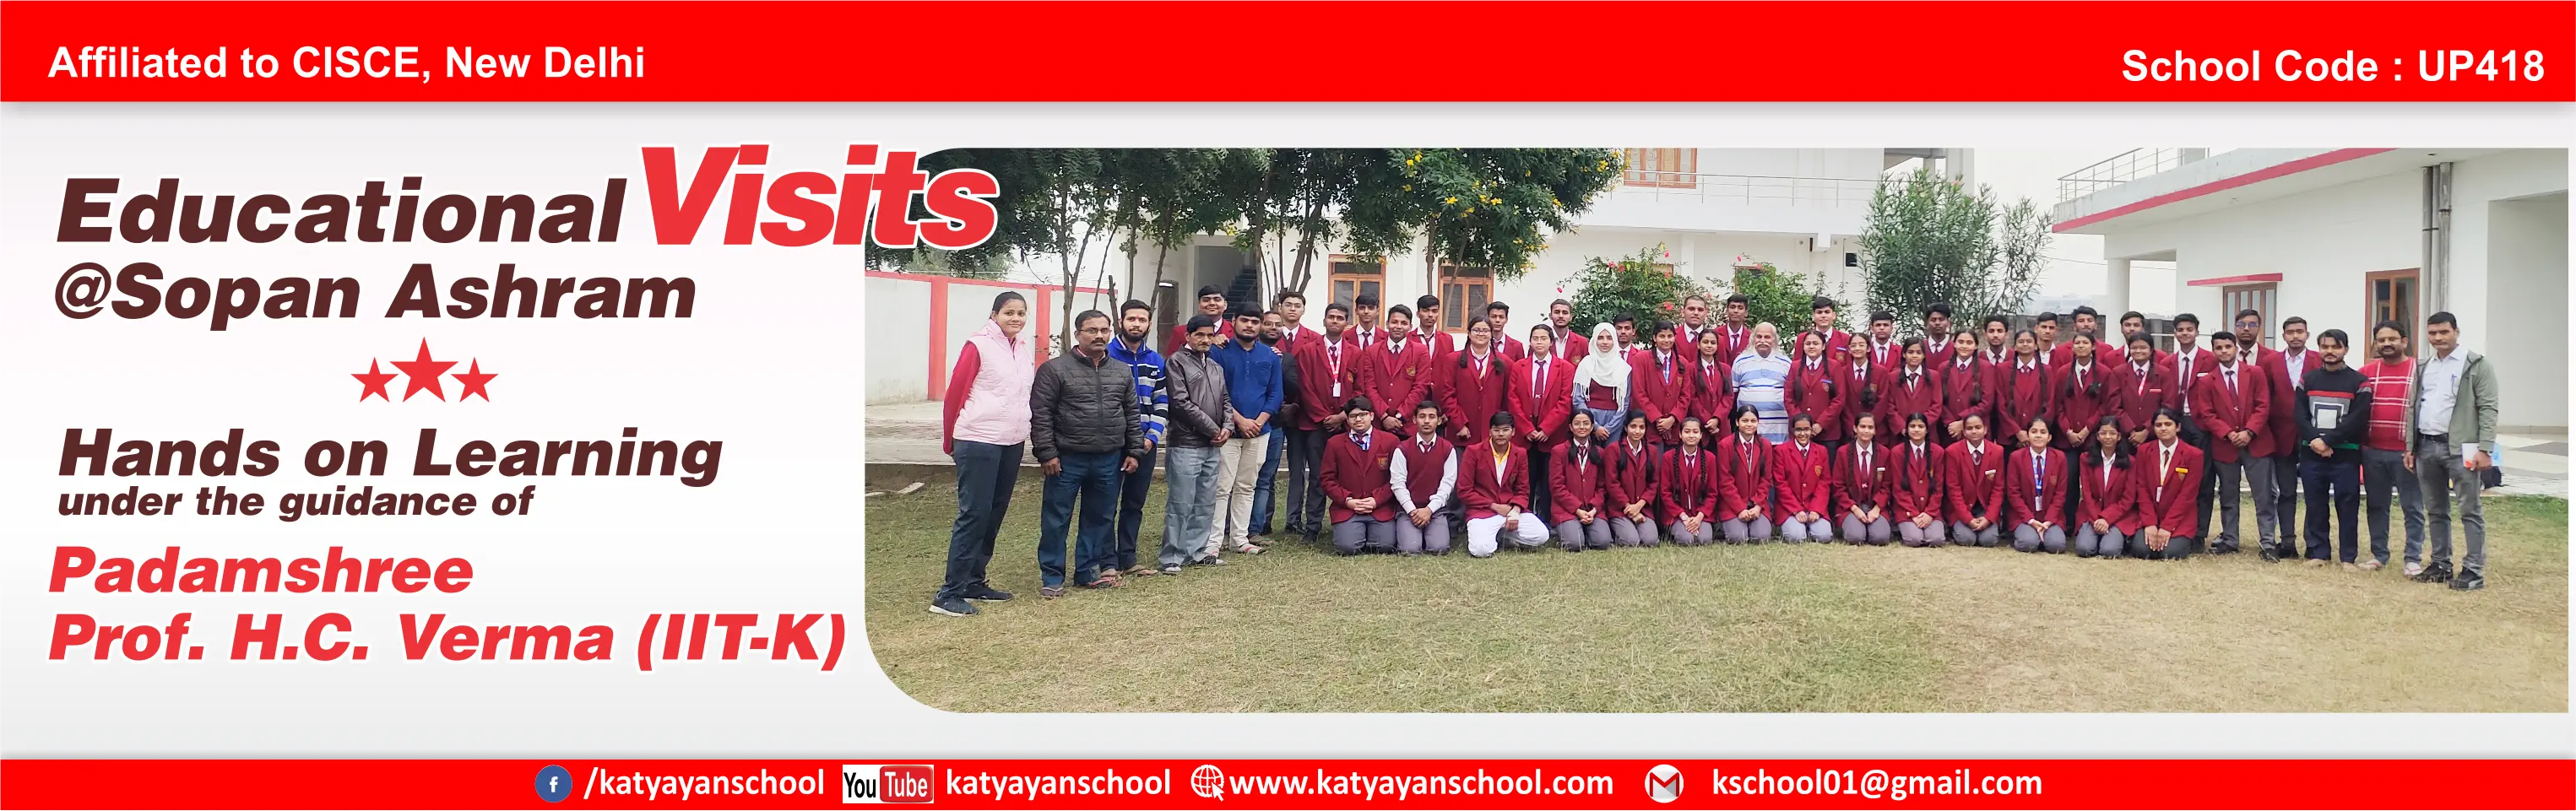 Heal the world with the power of Ayurveda - katyayan School, Kanpur, India